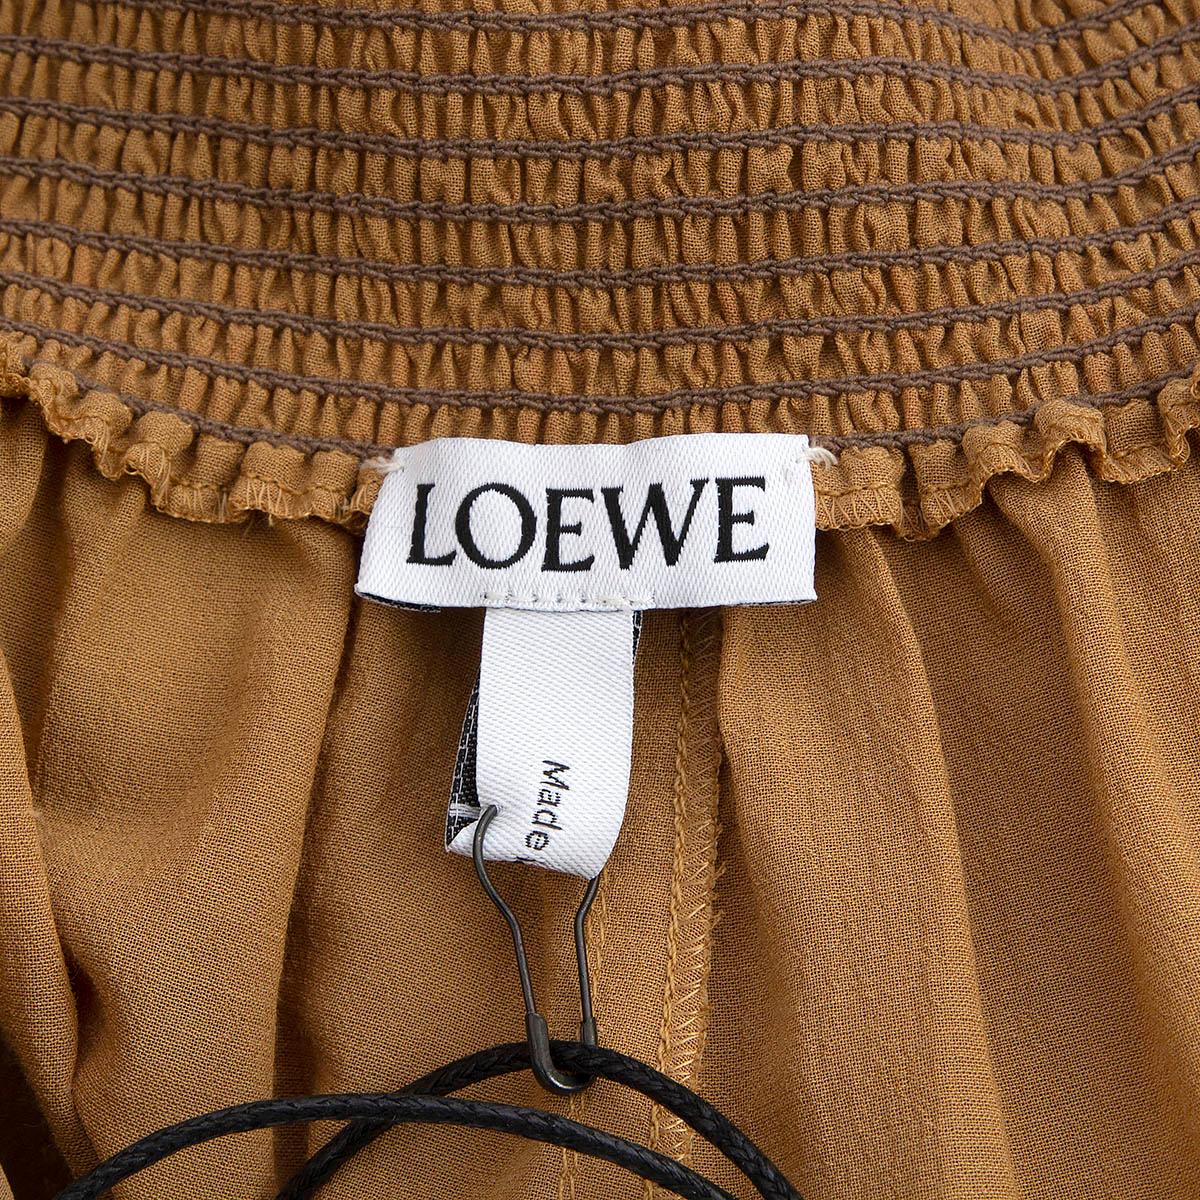 Women's LOEWE camel brown cotton EMBROIDERED MAXI Dress M